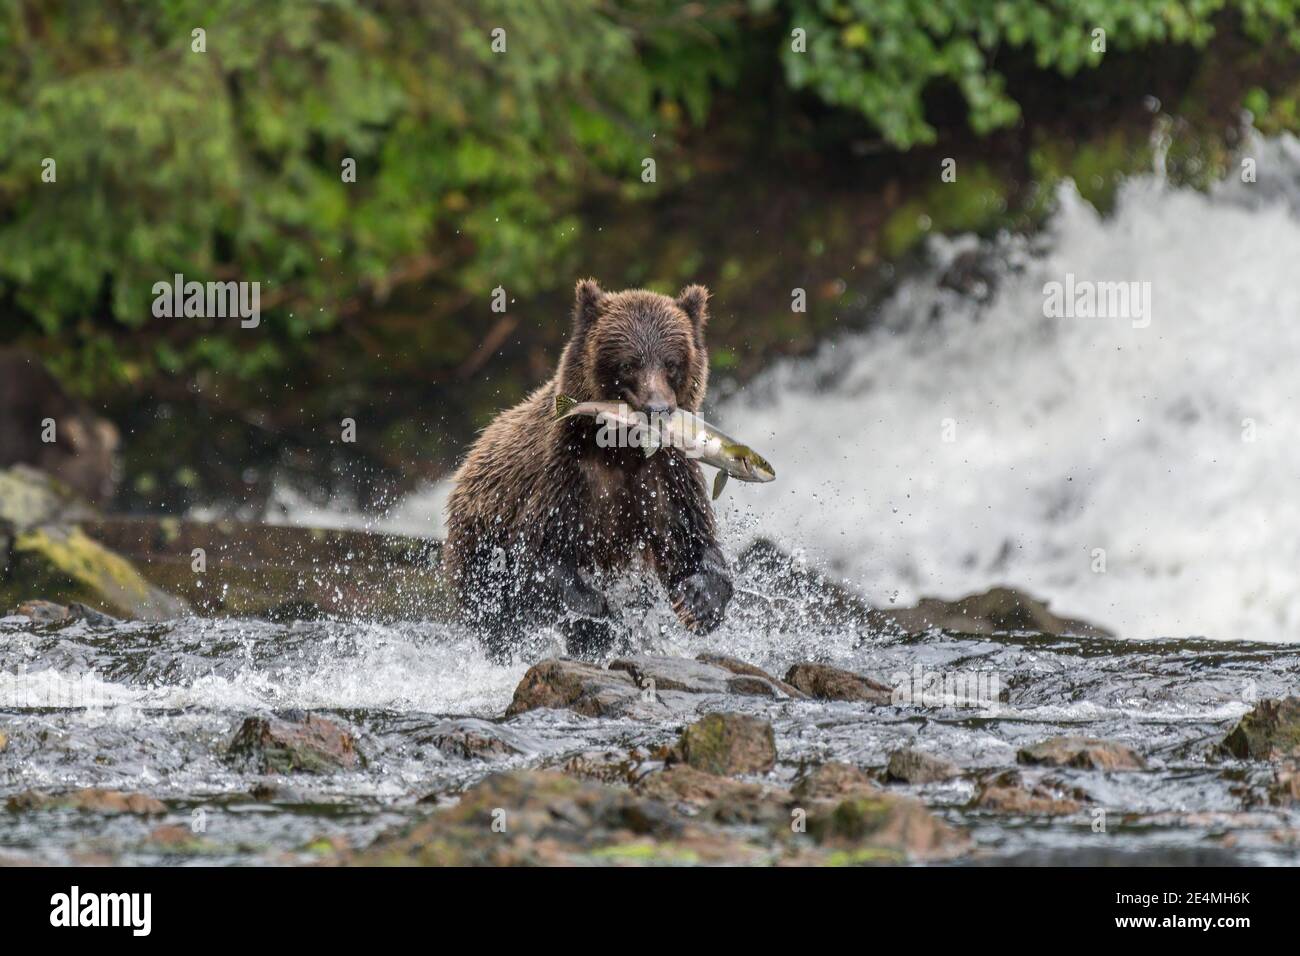 A brown bear  (Ursus arctos) running across a river carrying a salmon in it's mouth in Alaska. Stock Photo